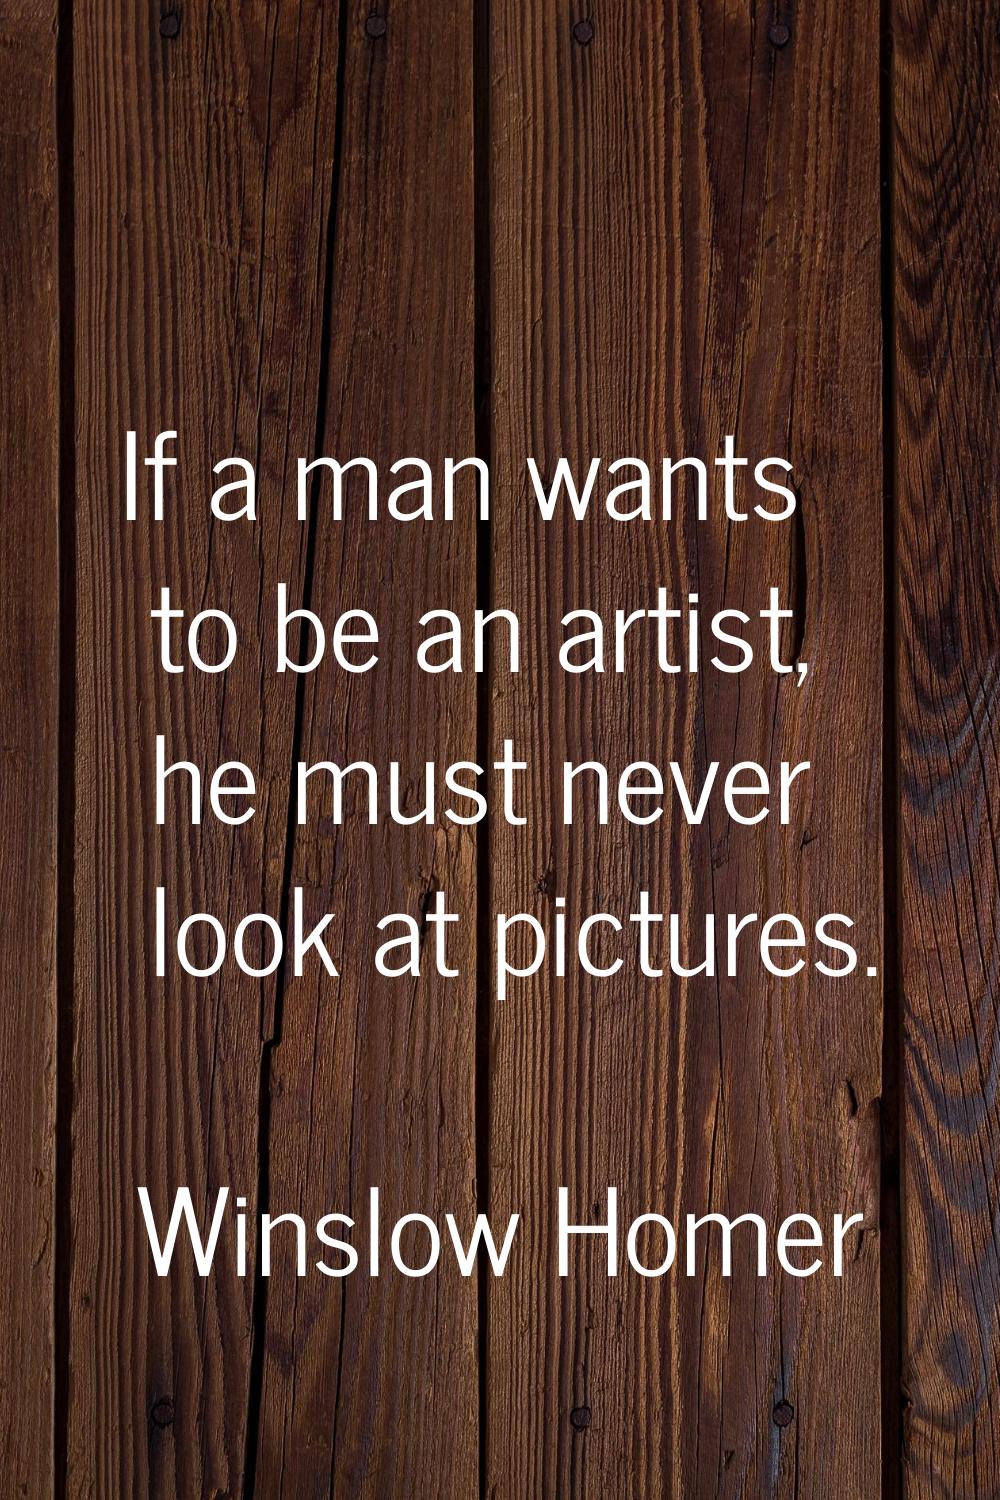 If a man wants to be an artist, he must never look at pictures.